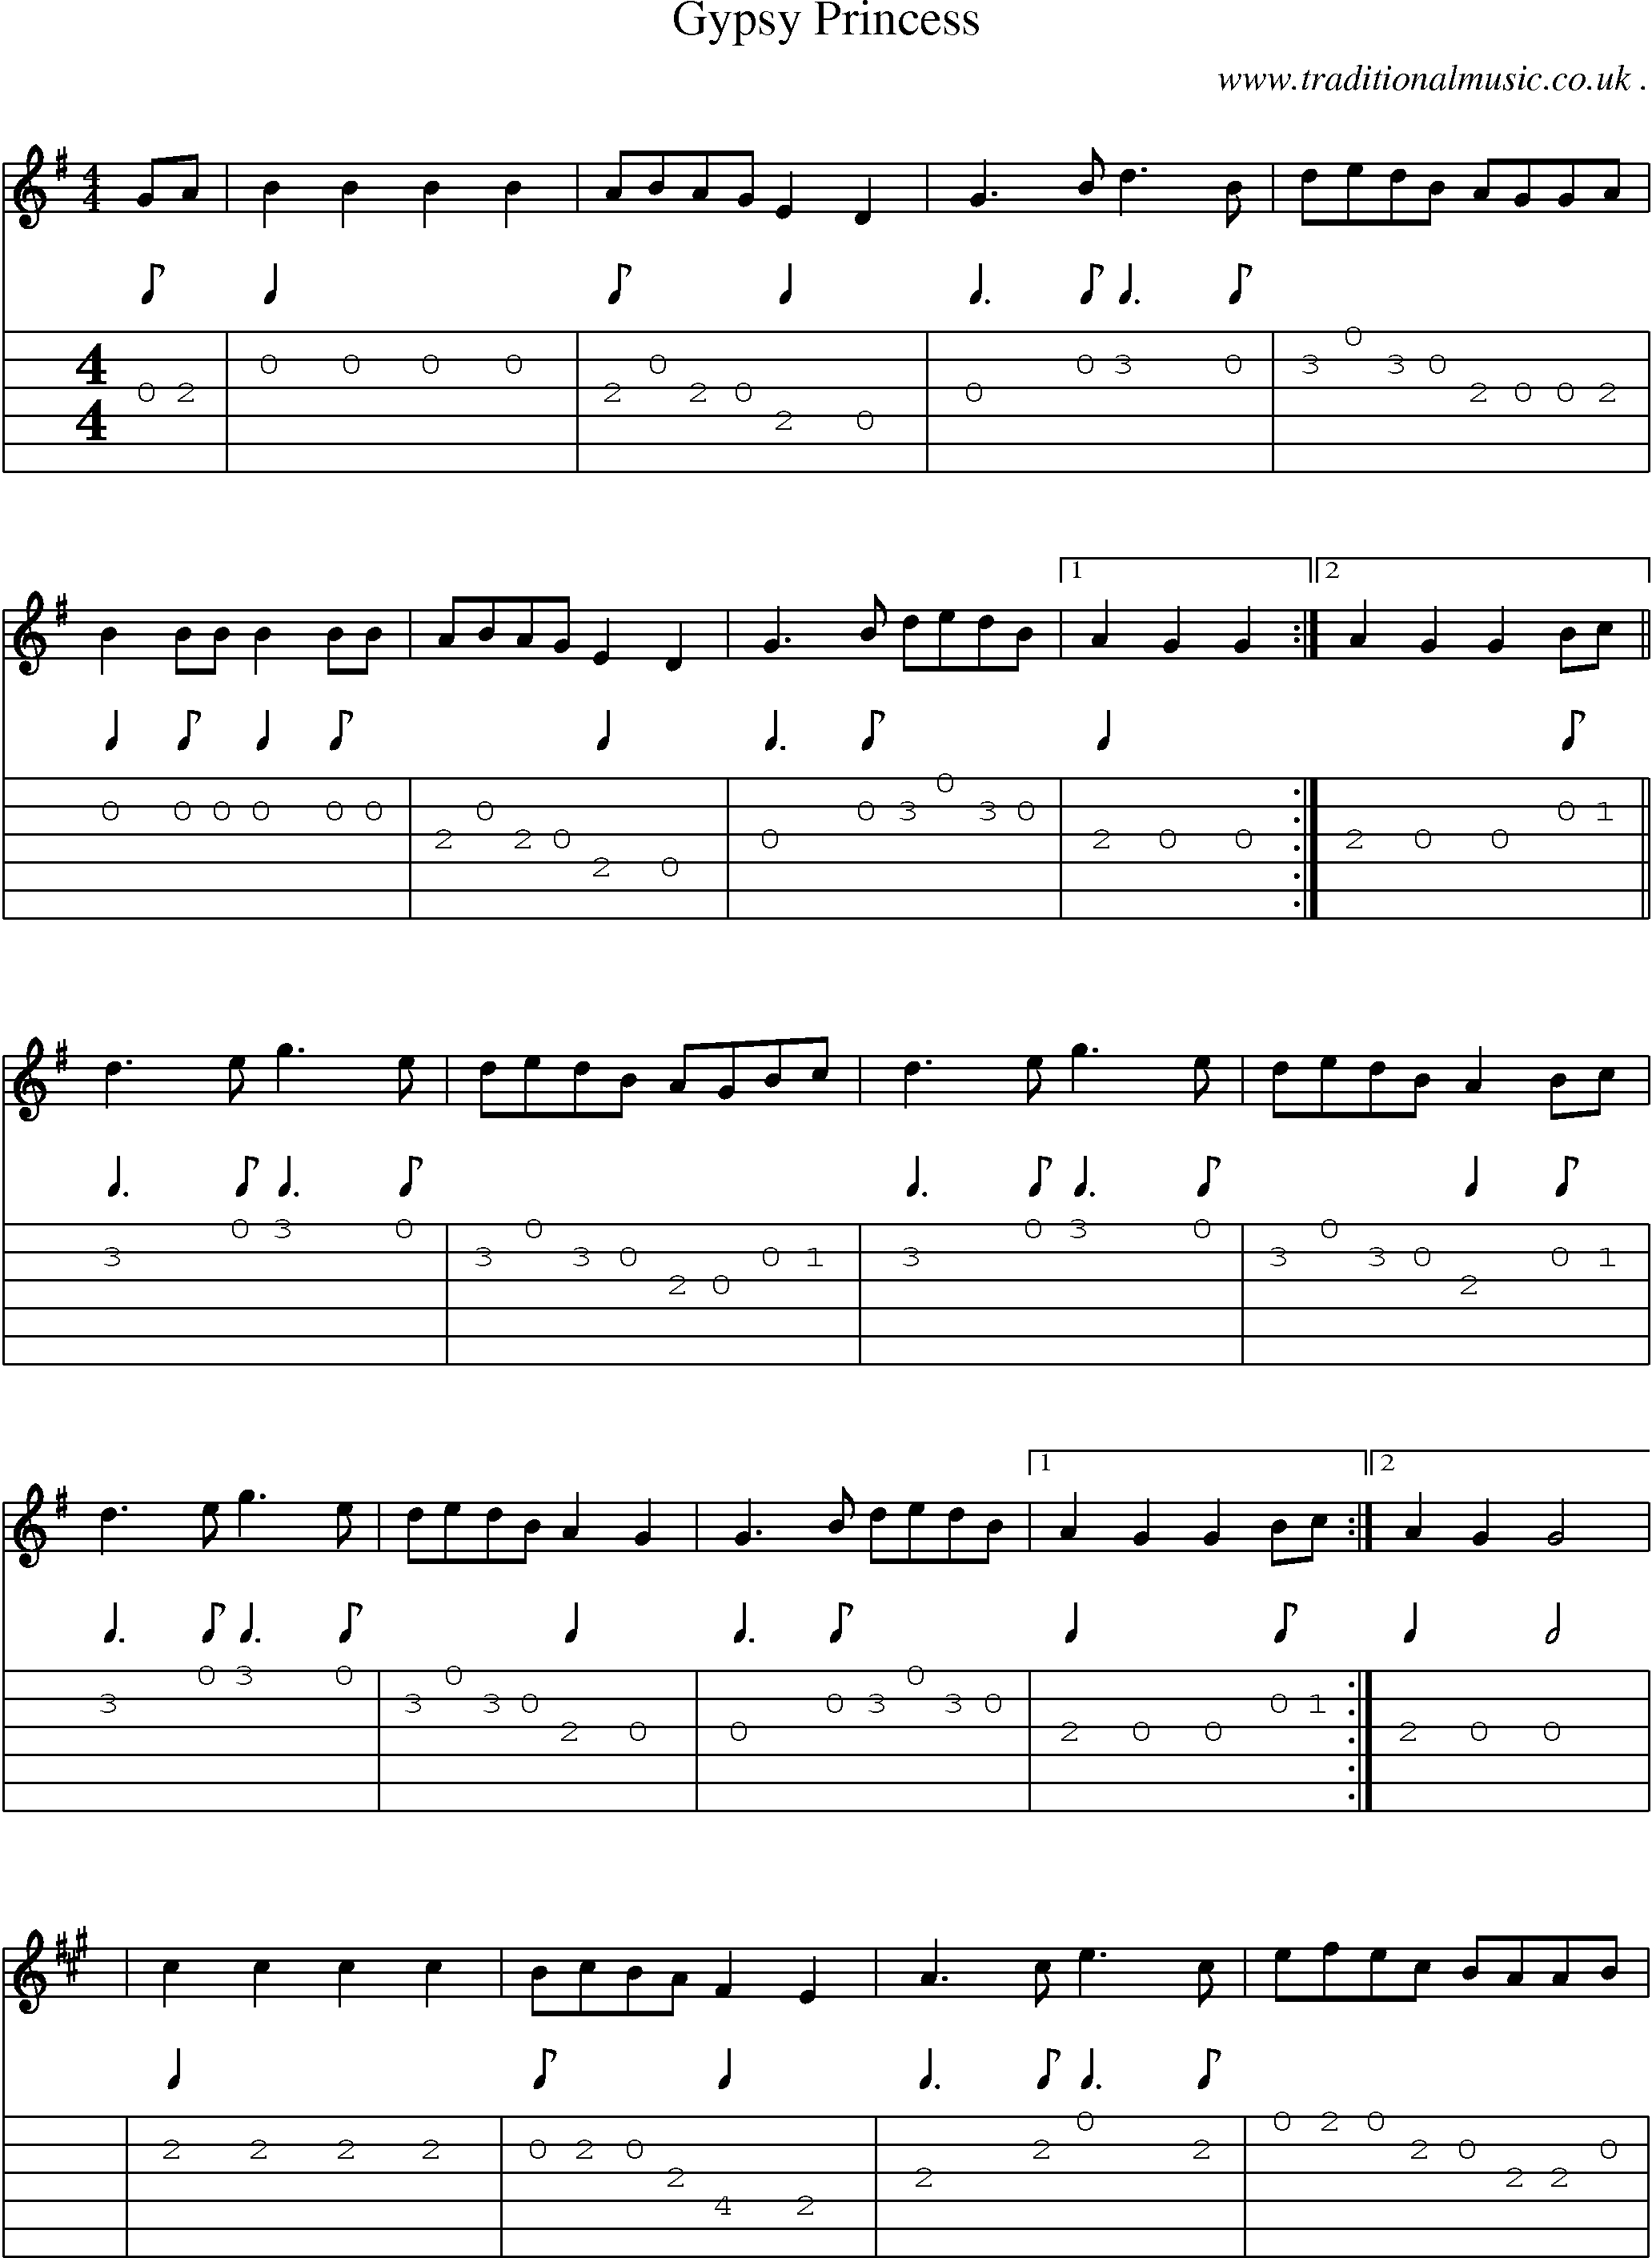 Sheet-Music and Guitar Tabs for Gypsy Princess